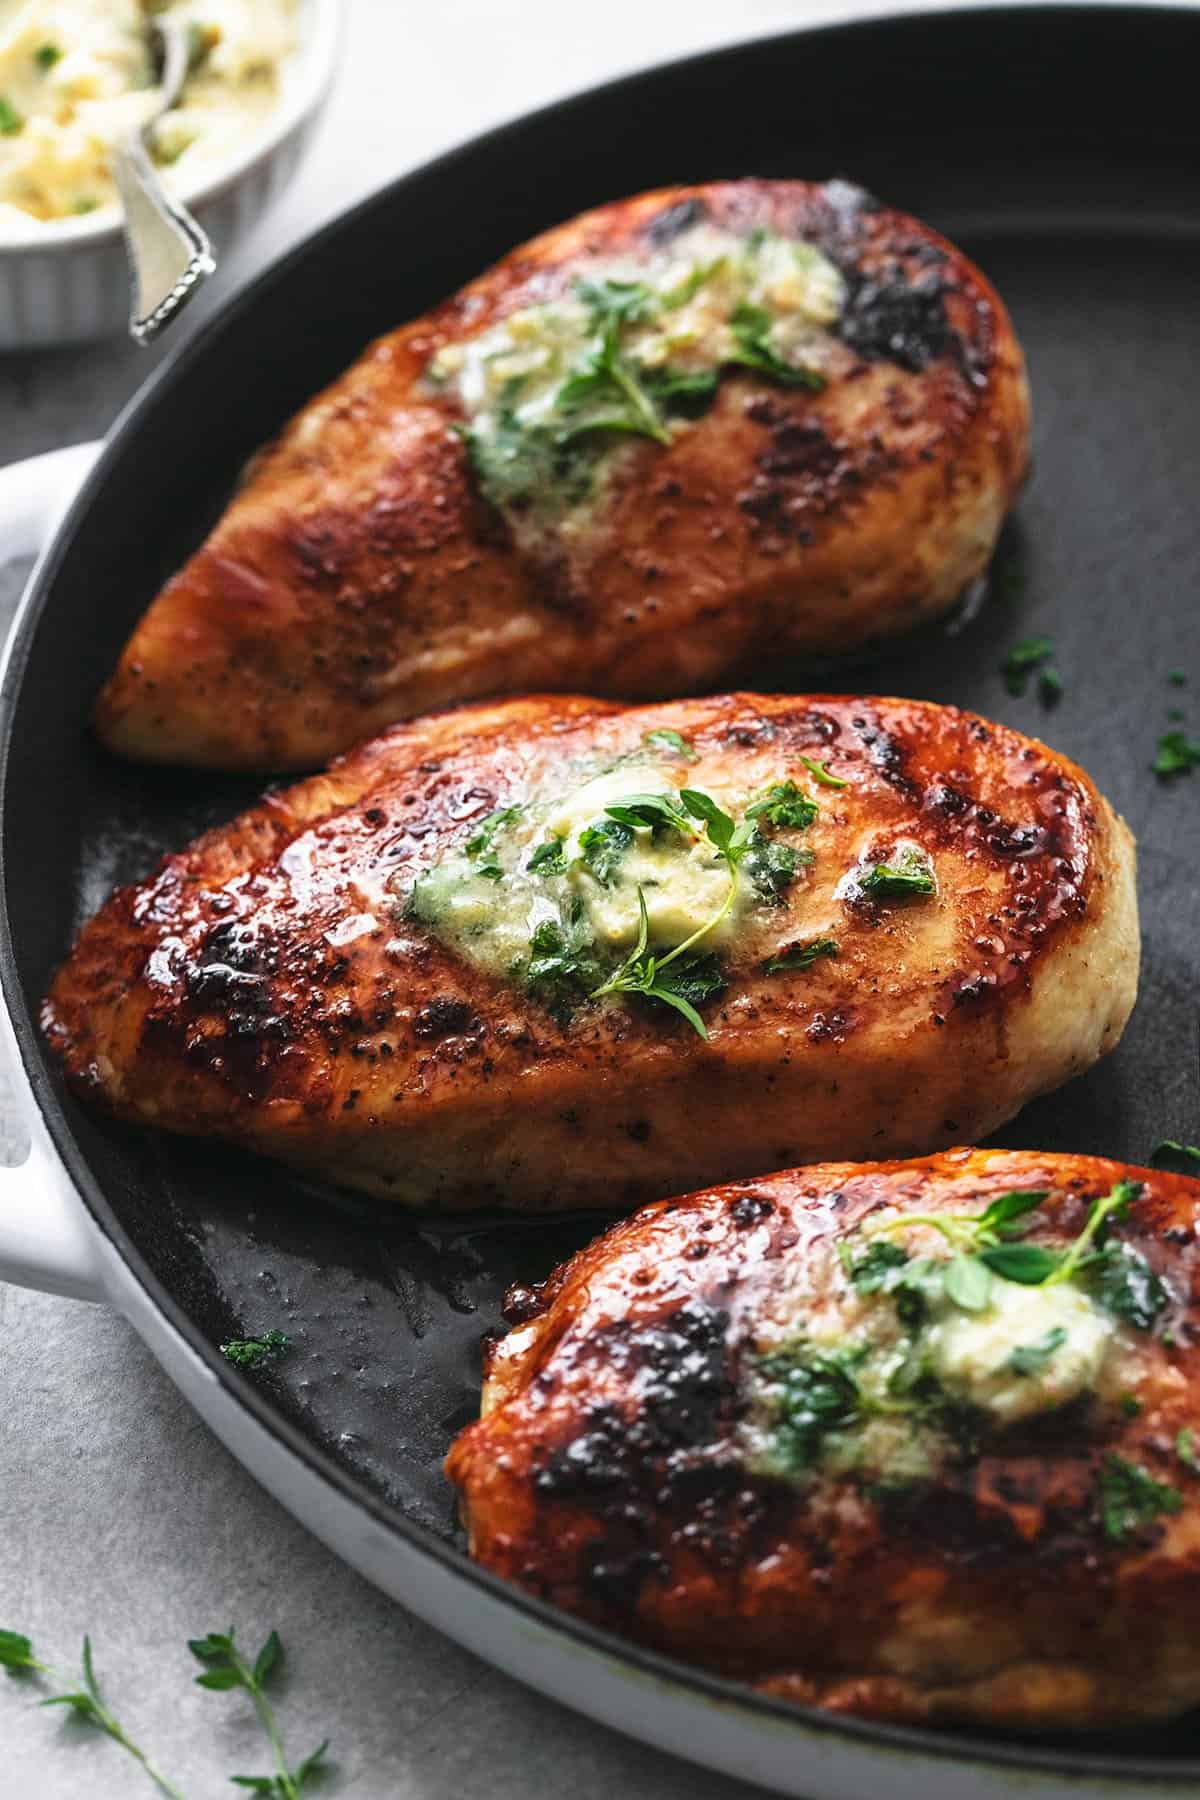 Honey-Butter-Grilled Chicken Thighs with Parsley Sauce Recipe